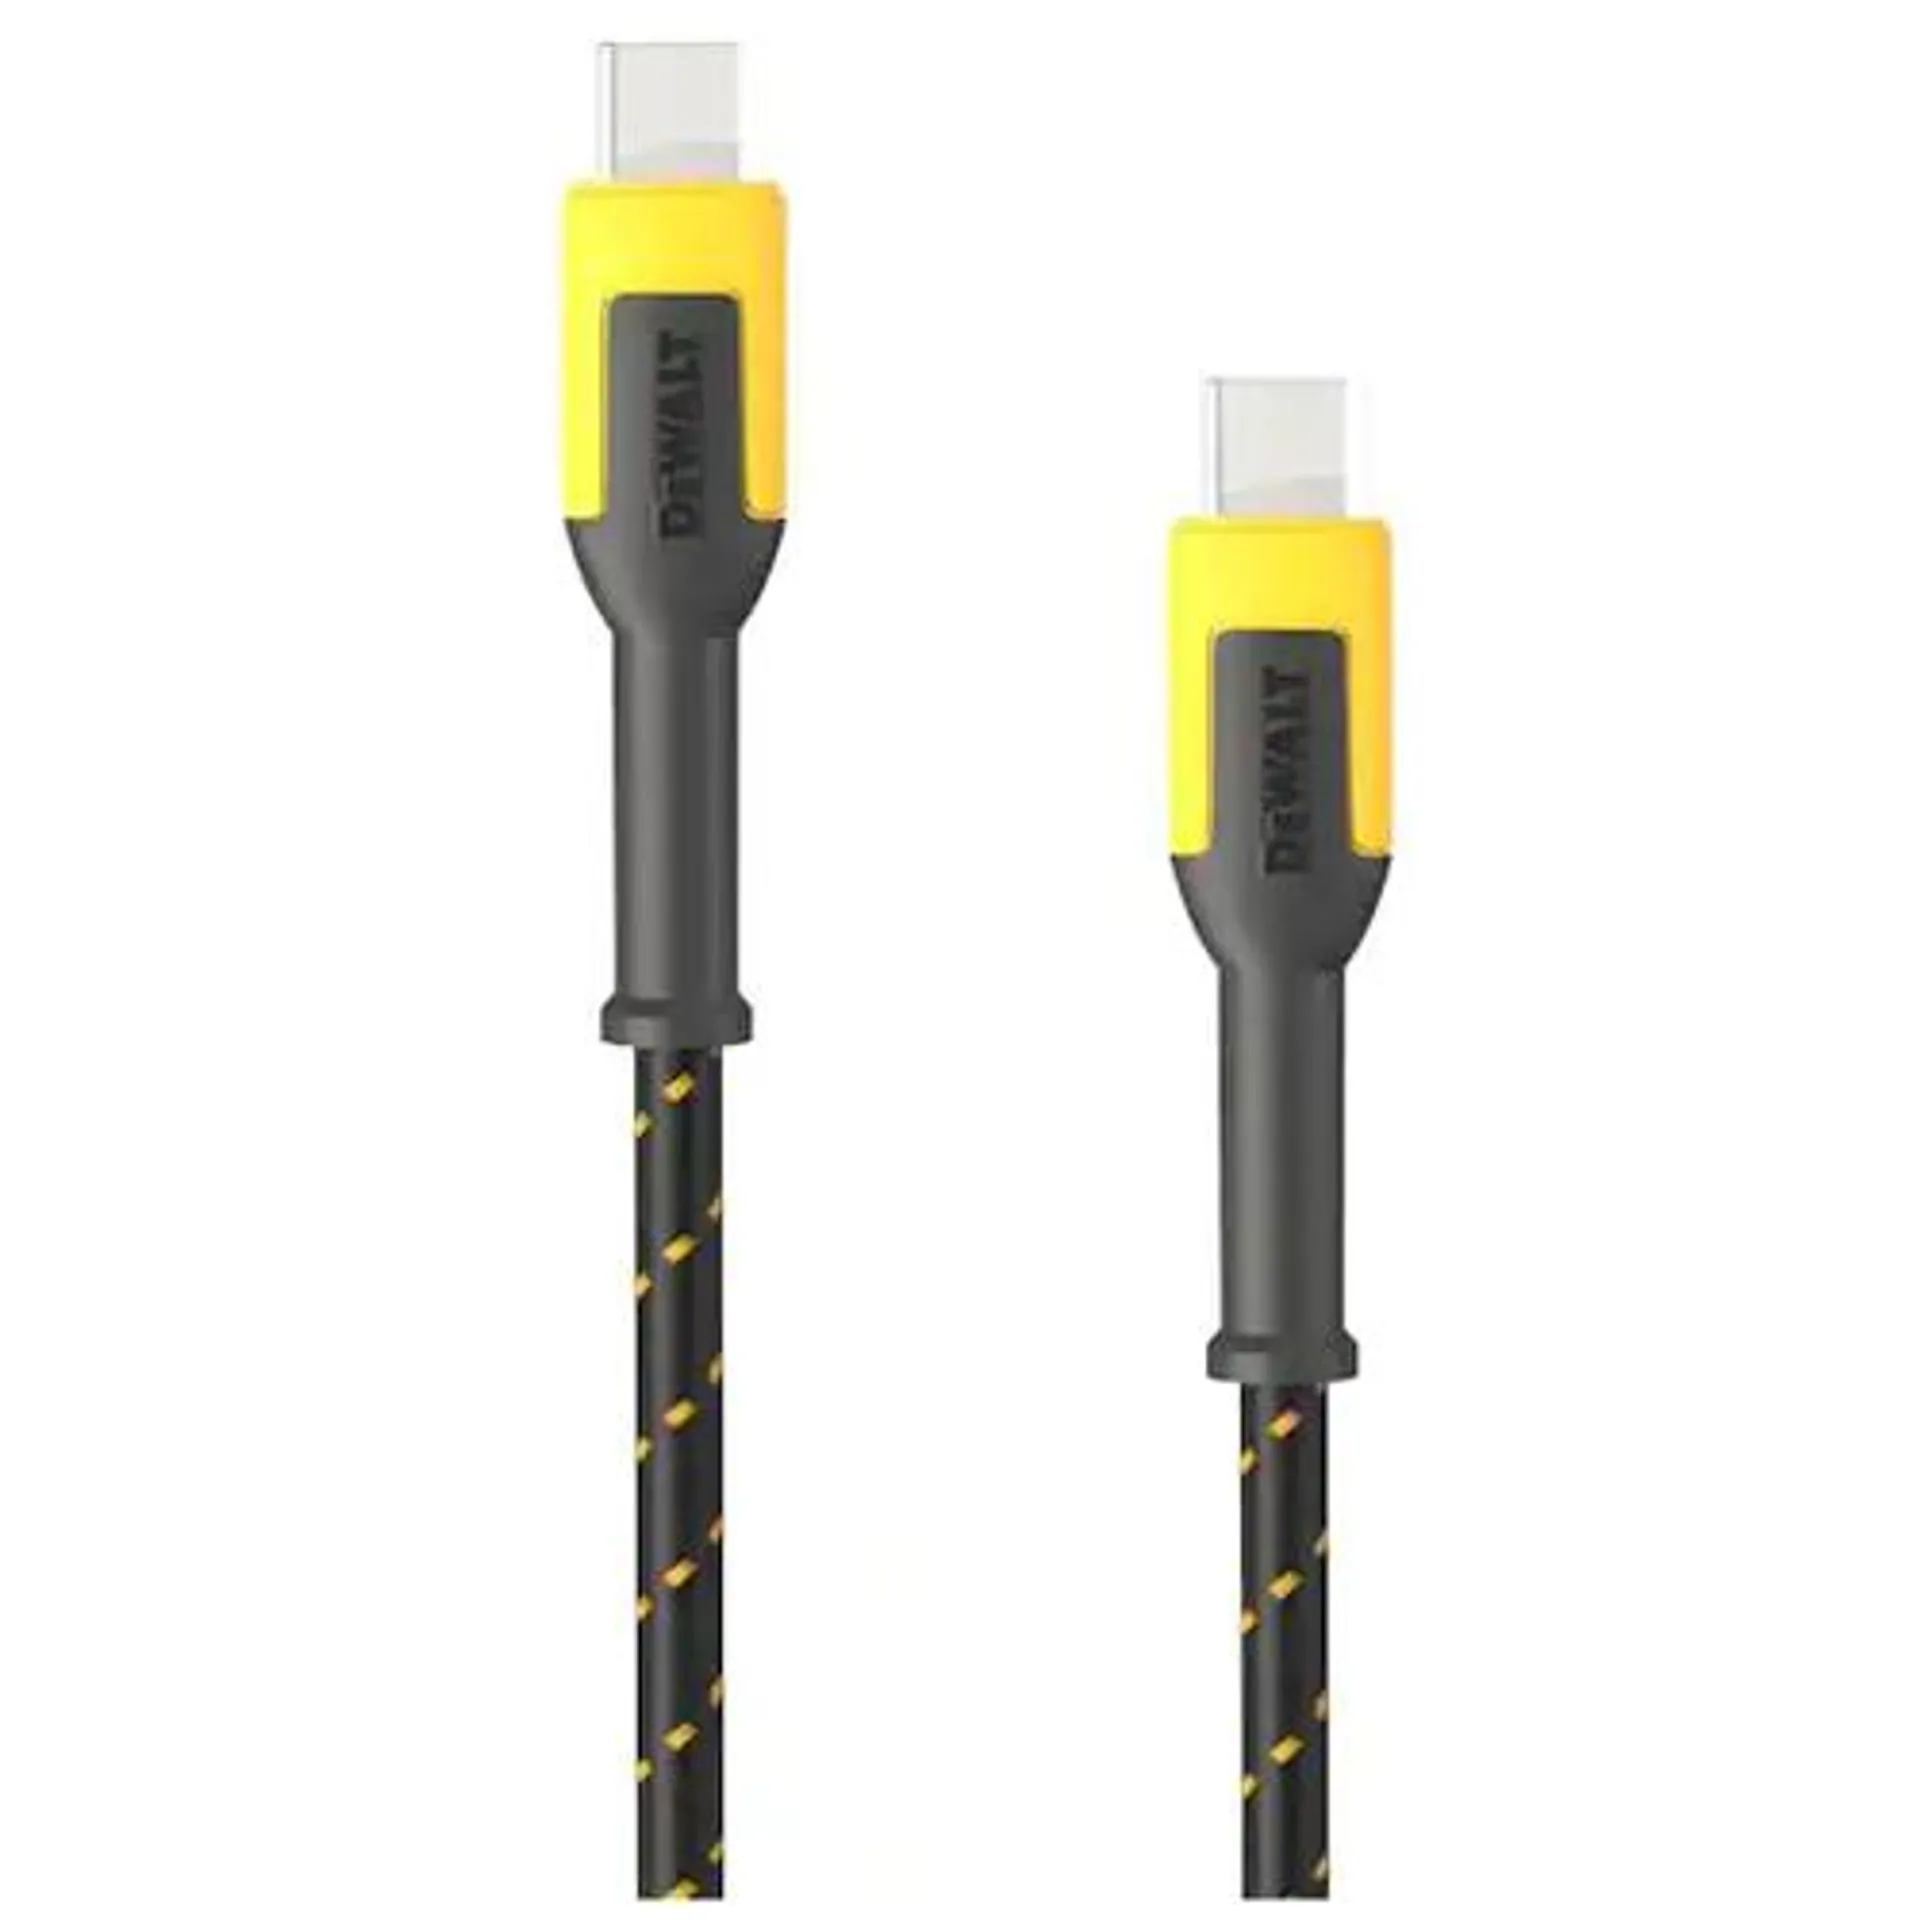 DeWalt 4 ft. Reinforced Charging Cable Cable USB-C to USB